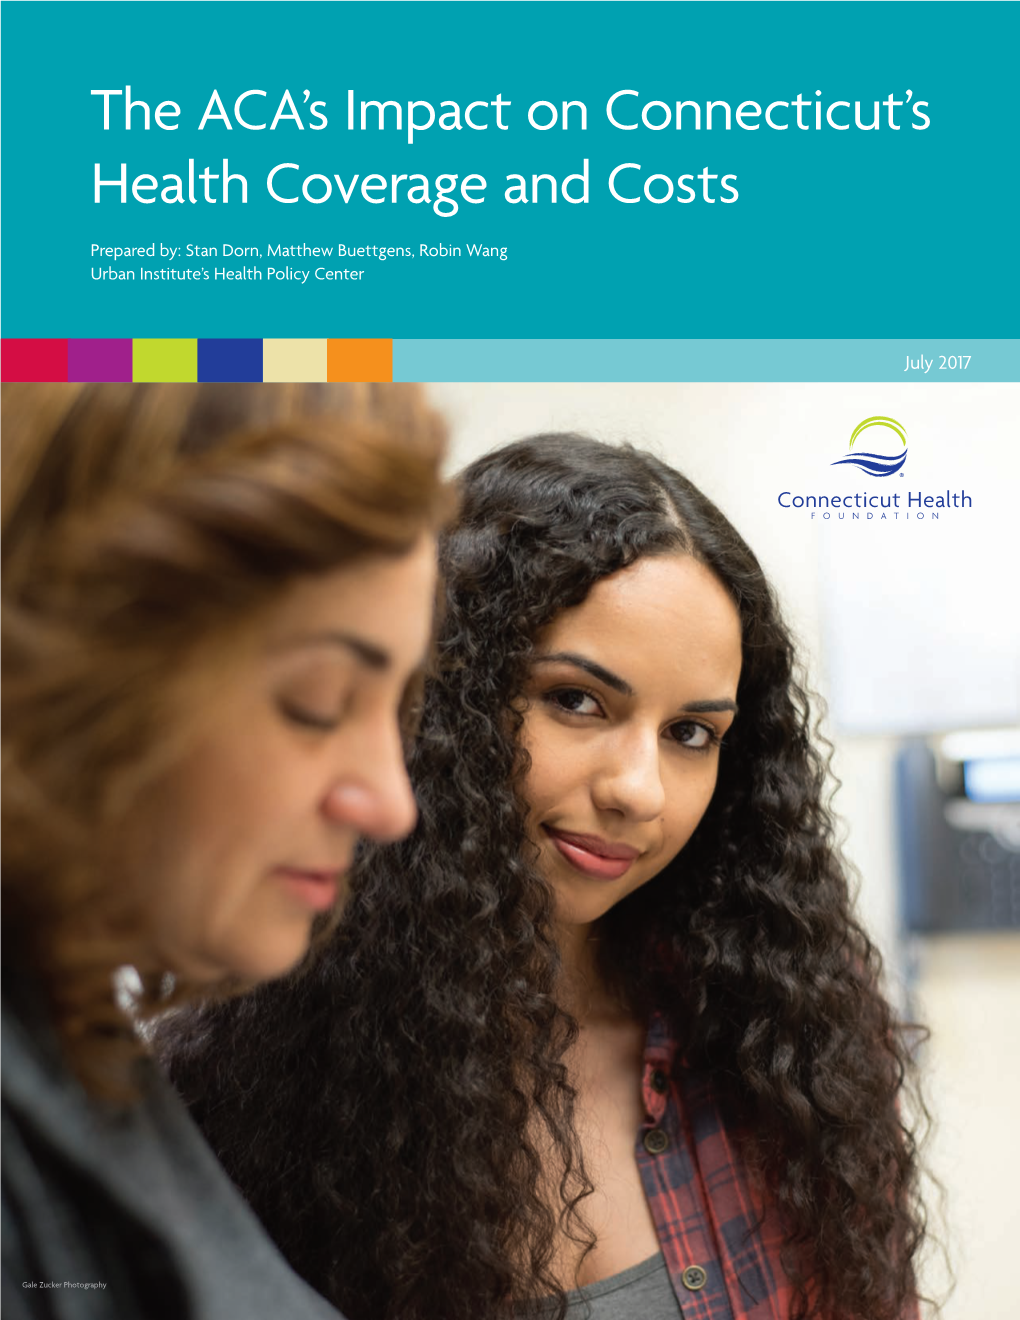 The ACA's Impact on Connecticut's Health Coverage and Costs